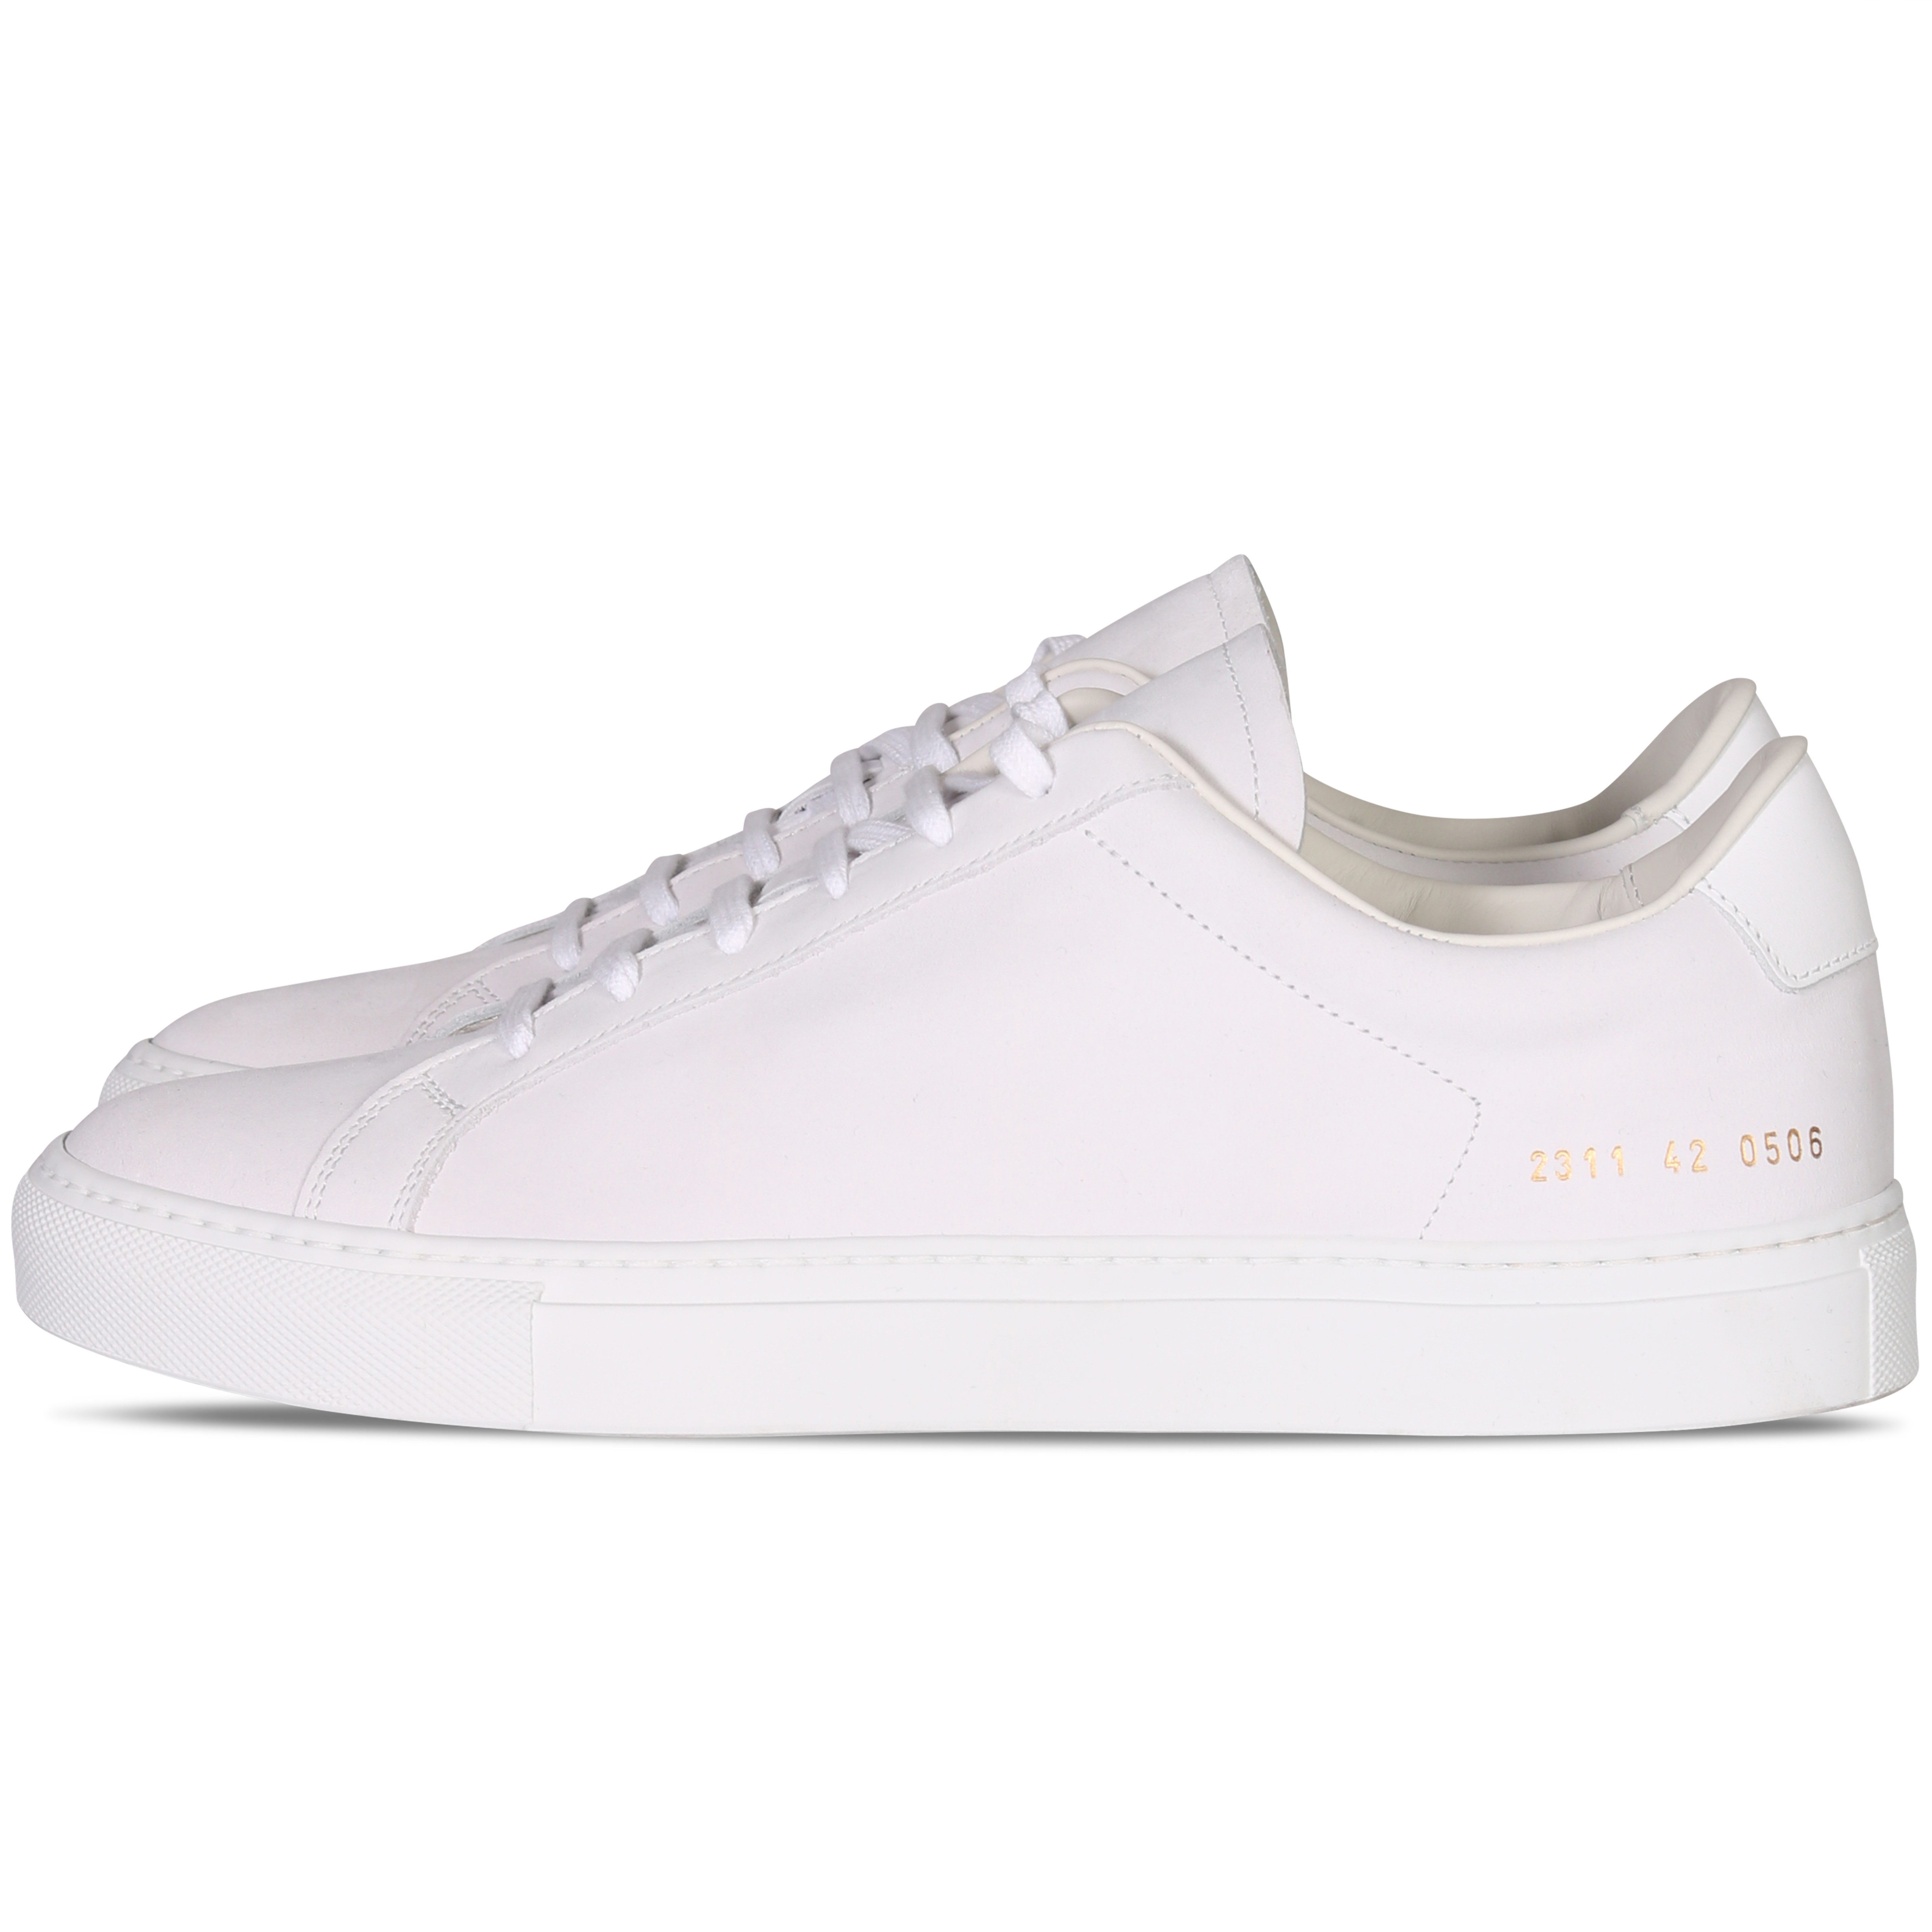 Common Projects Sneaker Retro Low White/White